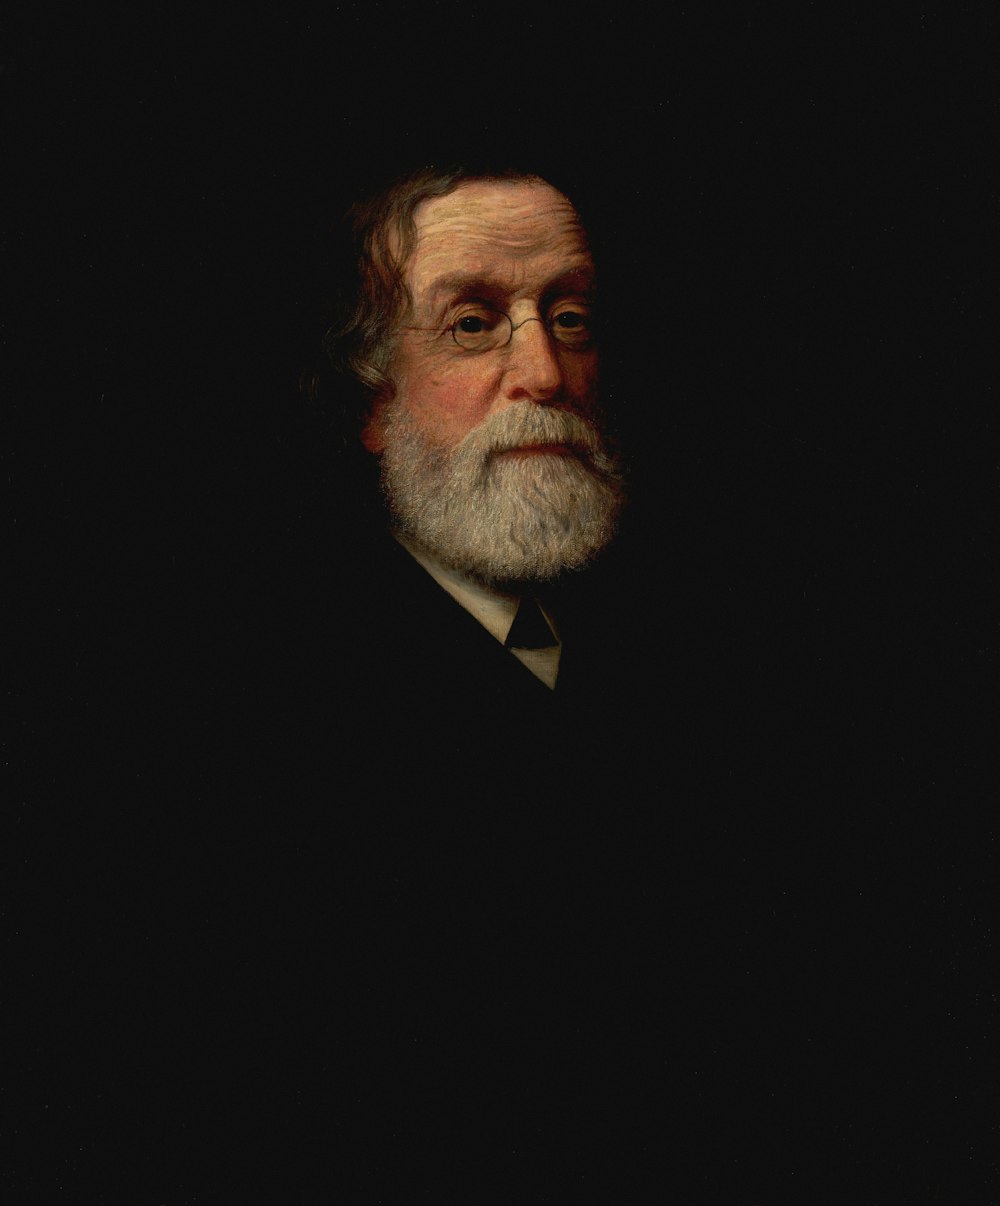 a painting of a man with a beard and glasses